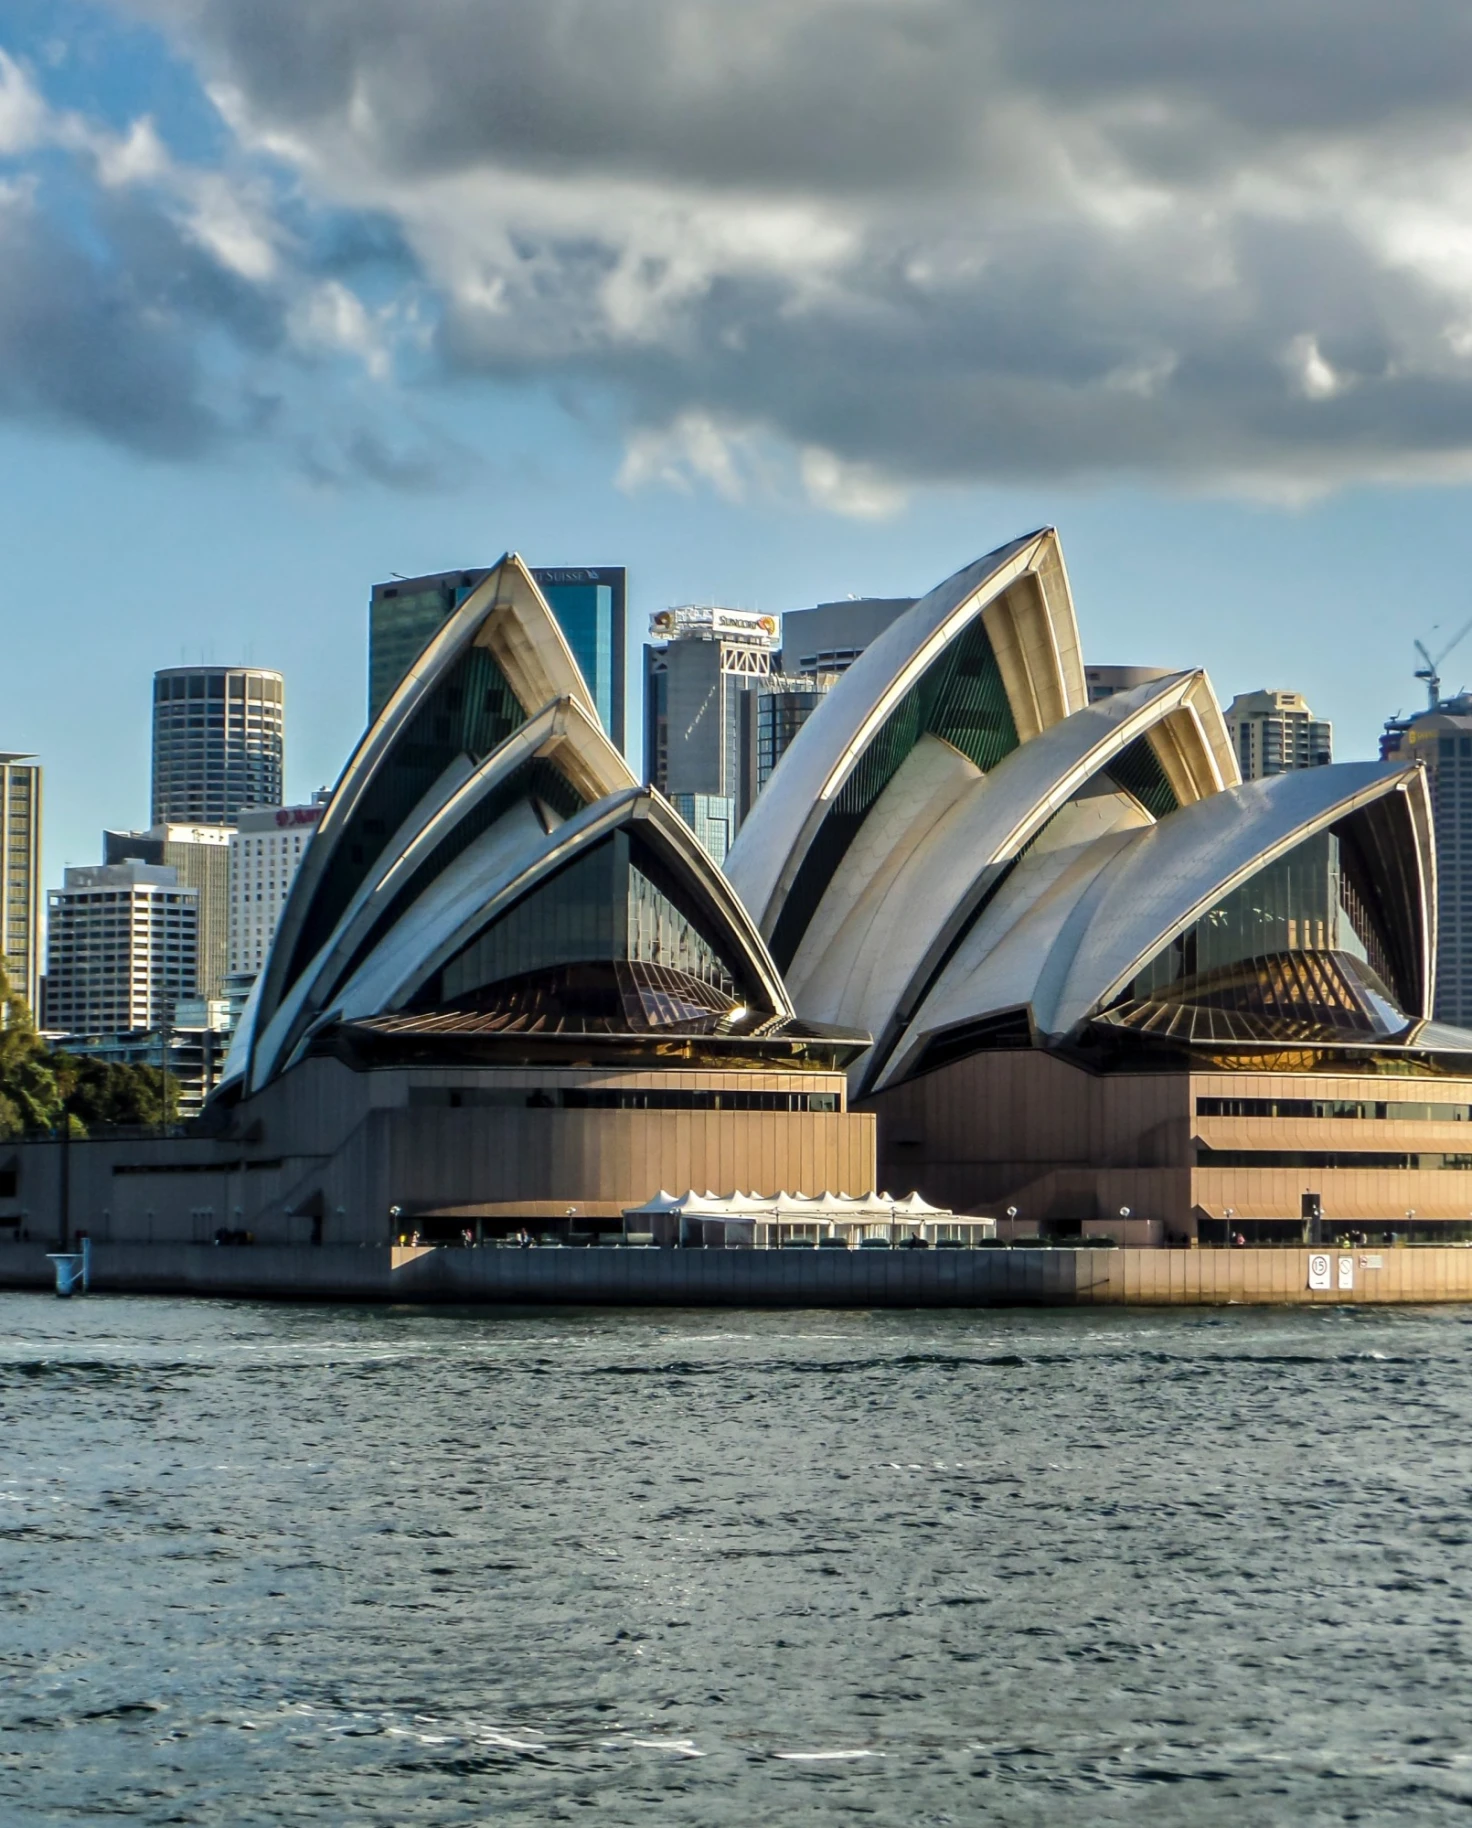 A view of the Sydney opera house from across the water.